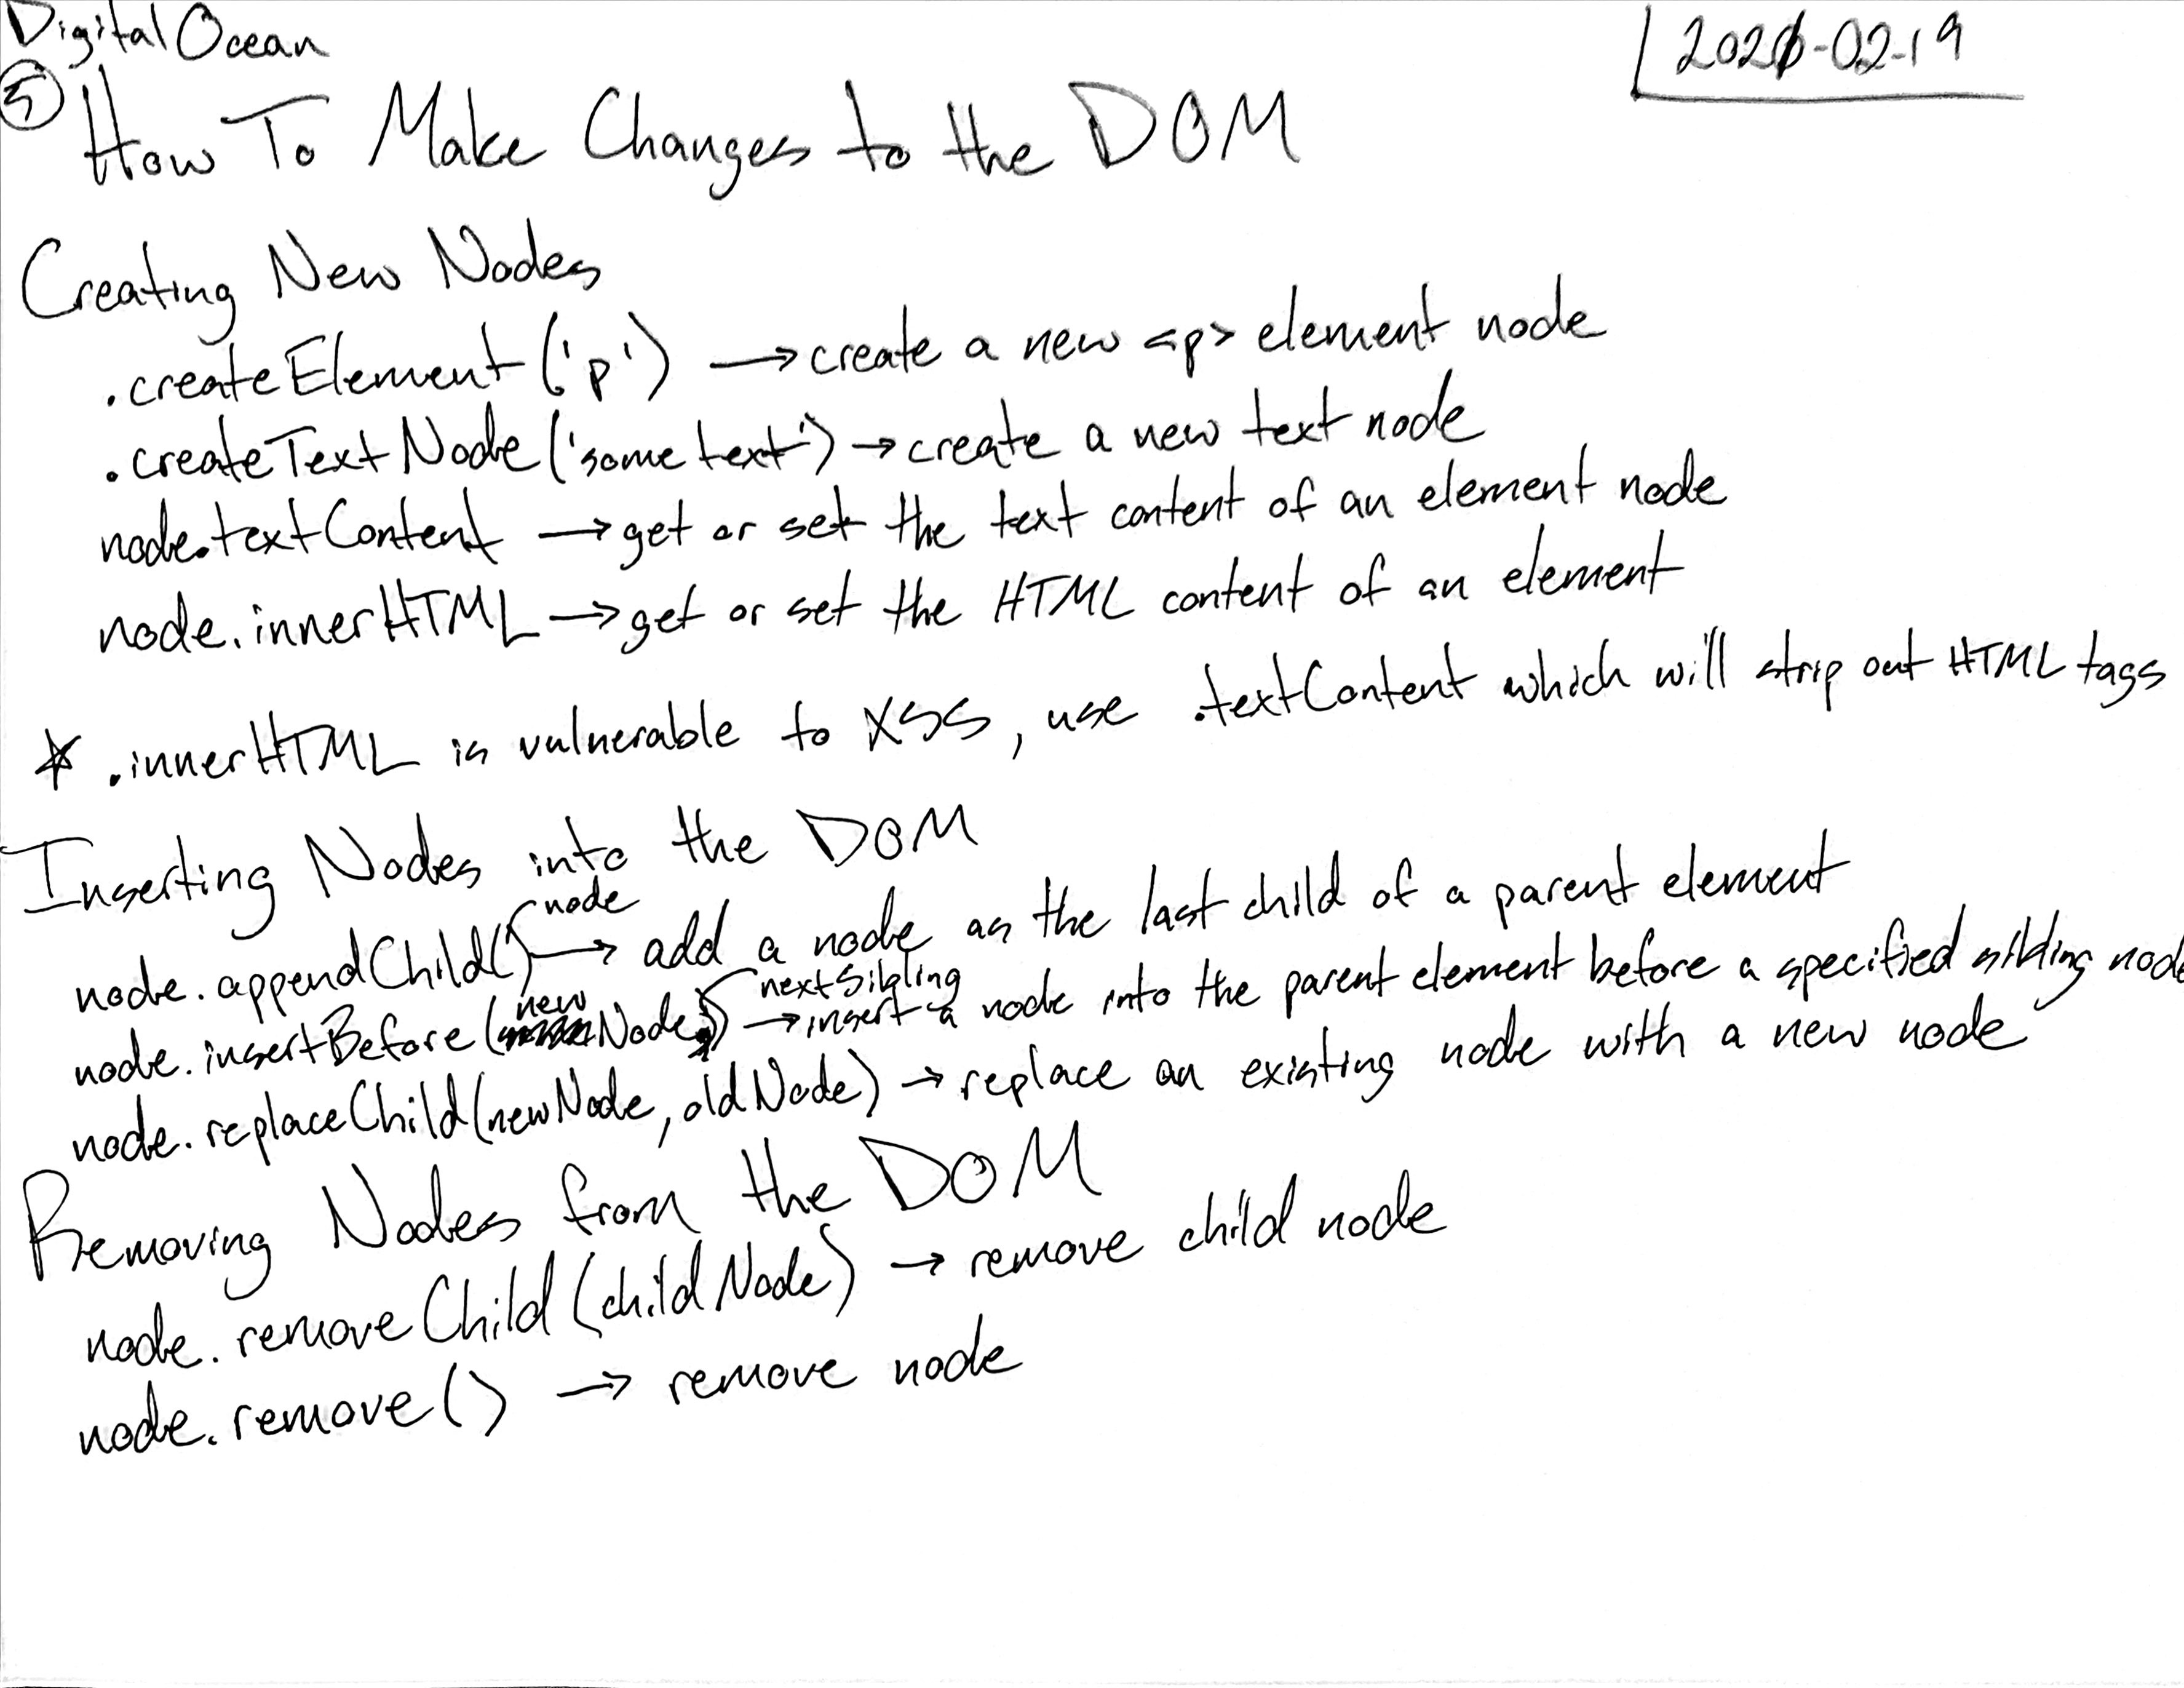 5 how to make changes to the dom